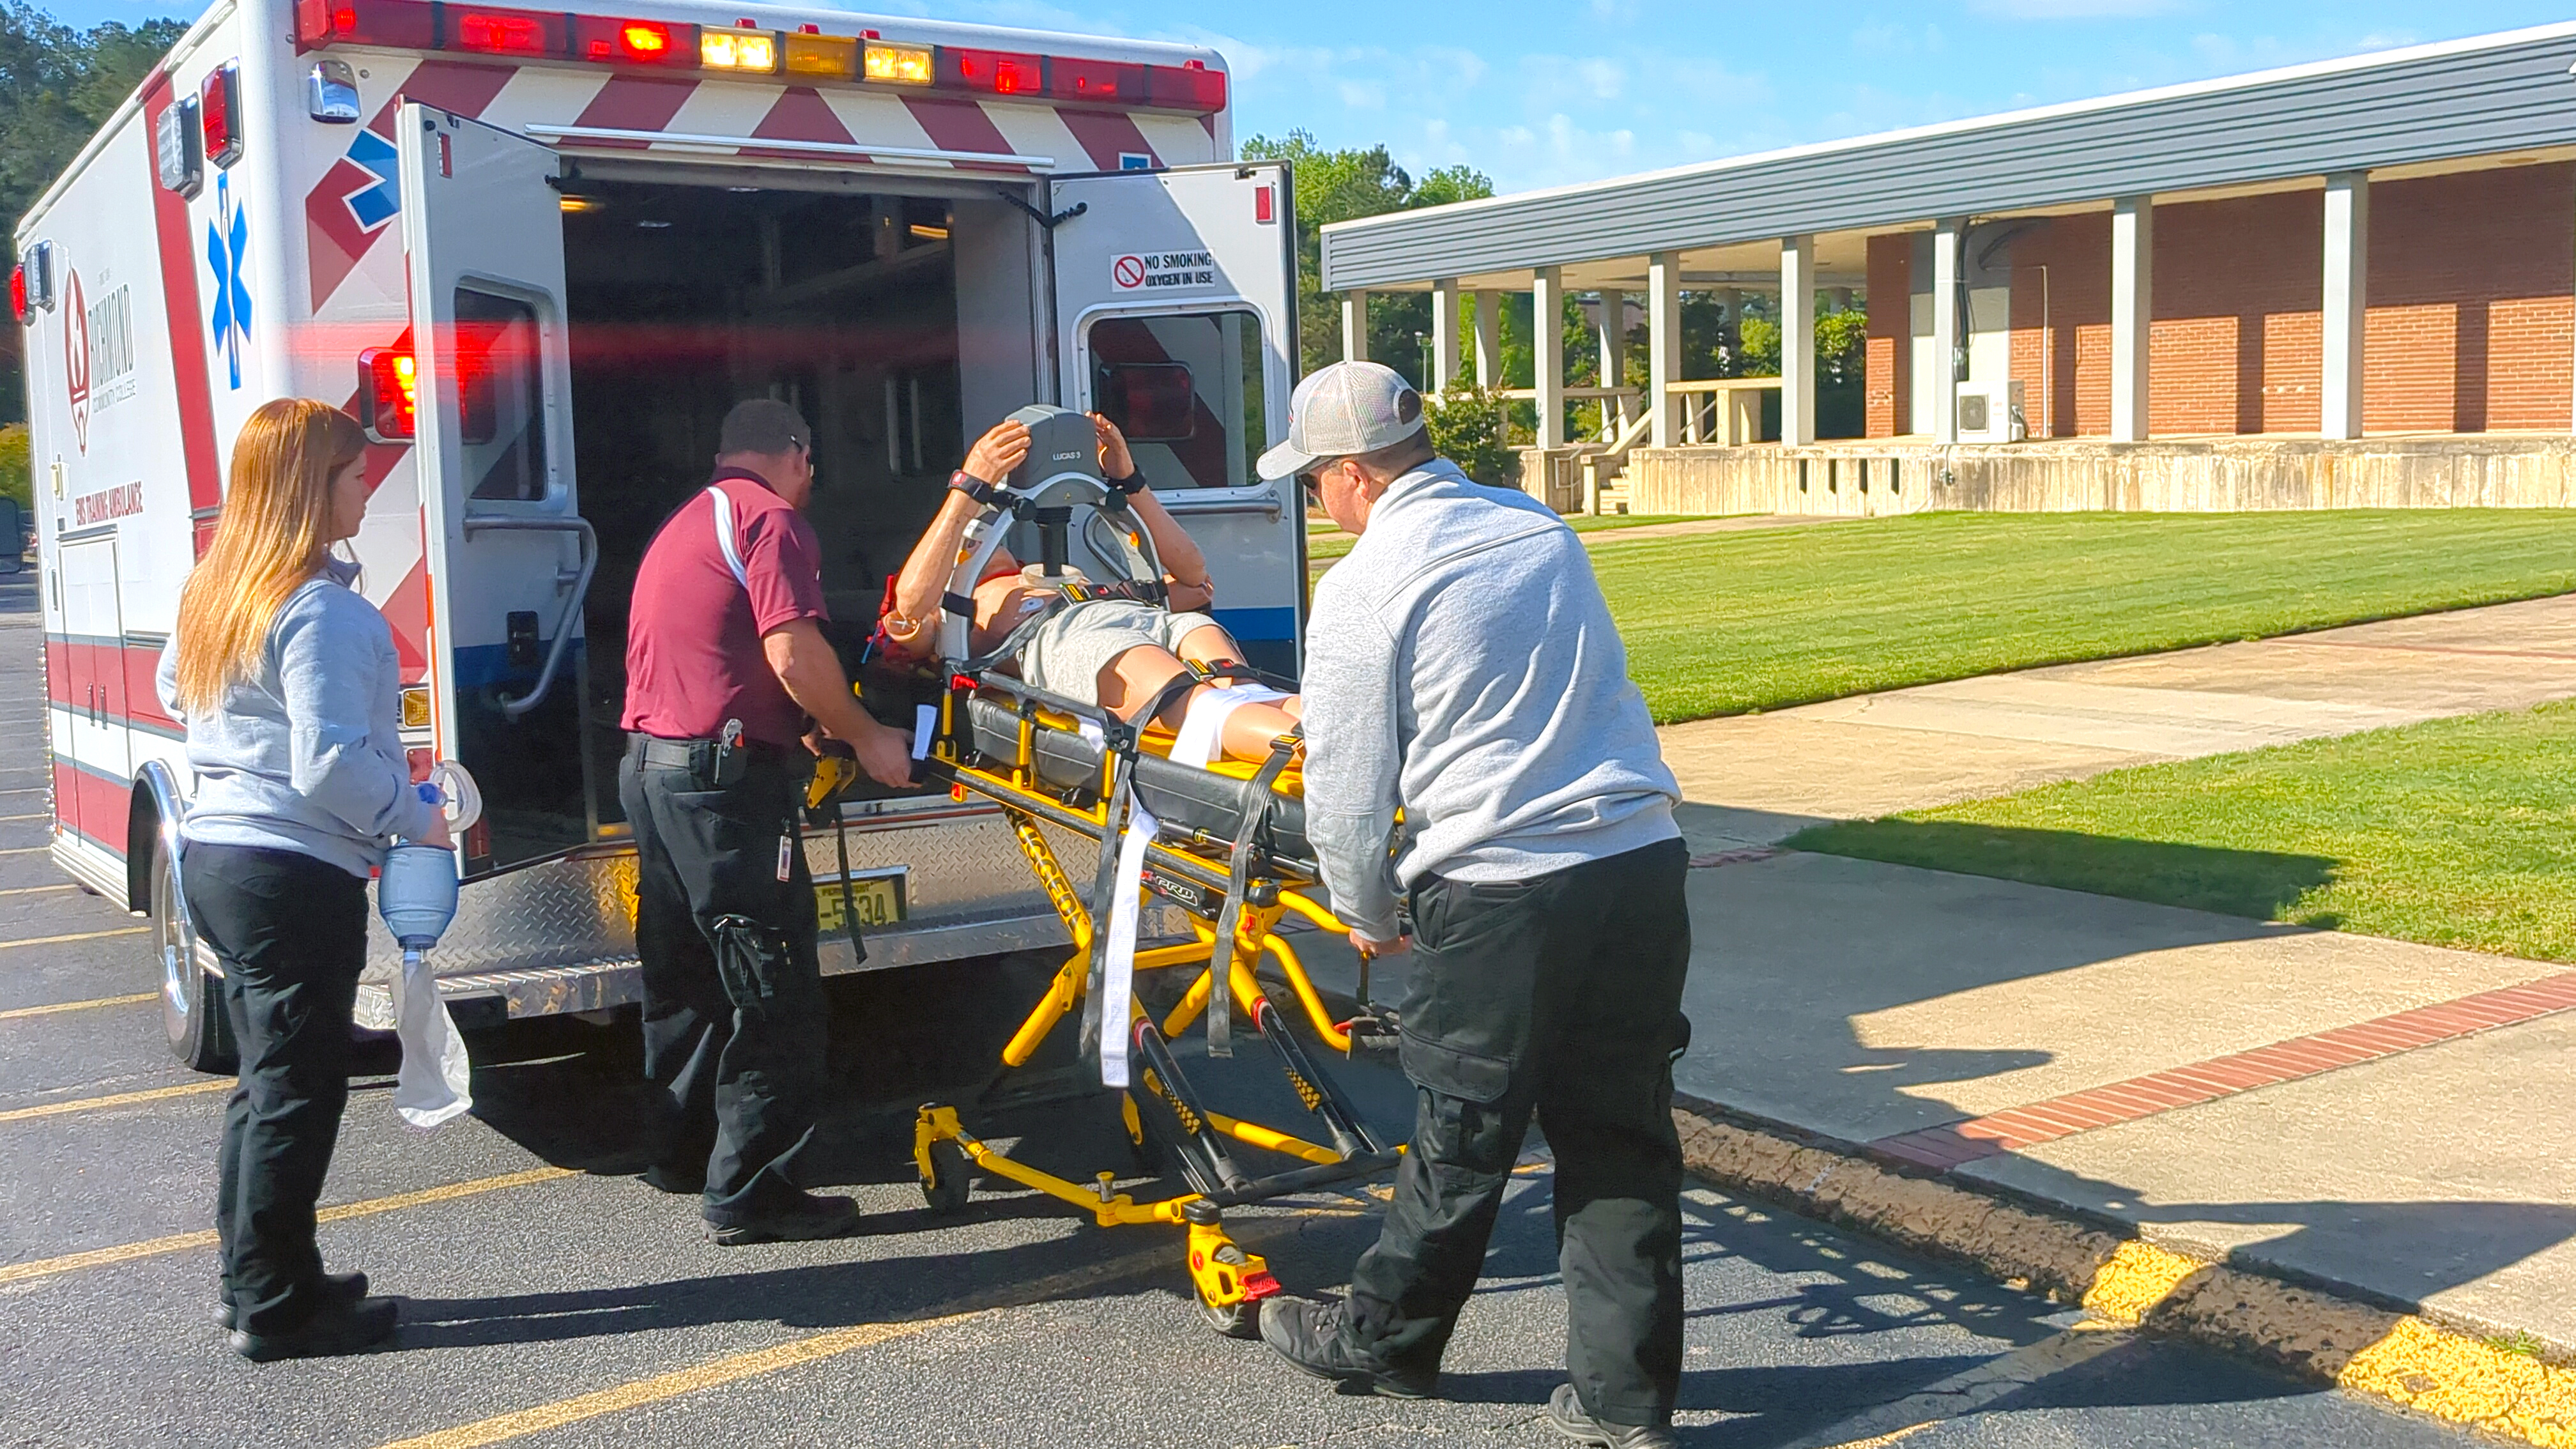 Students loading patient into ambulance